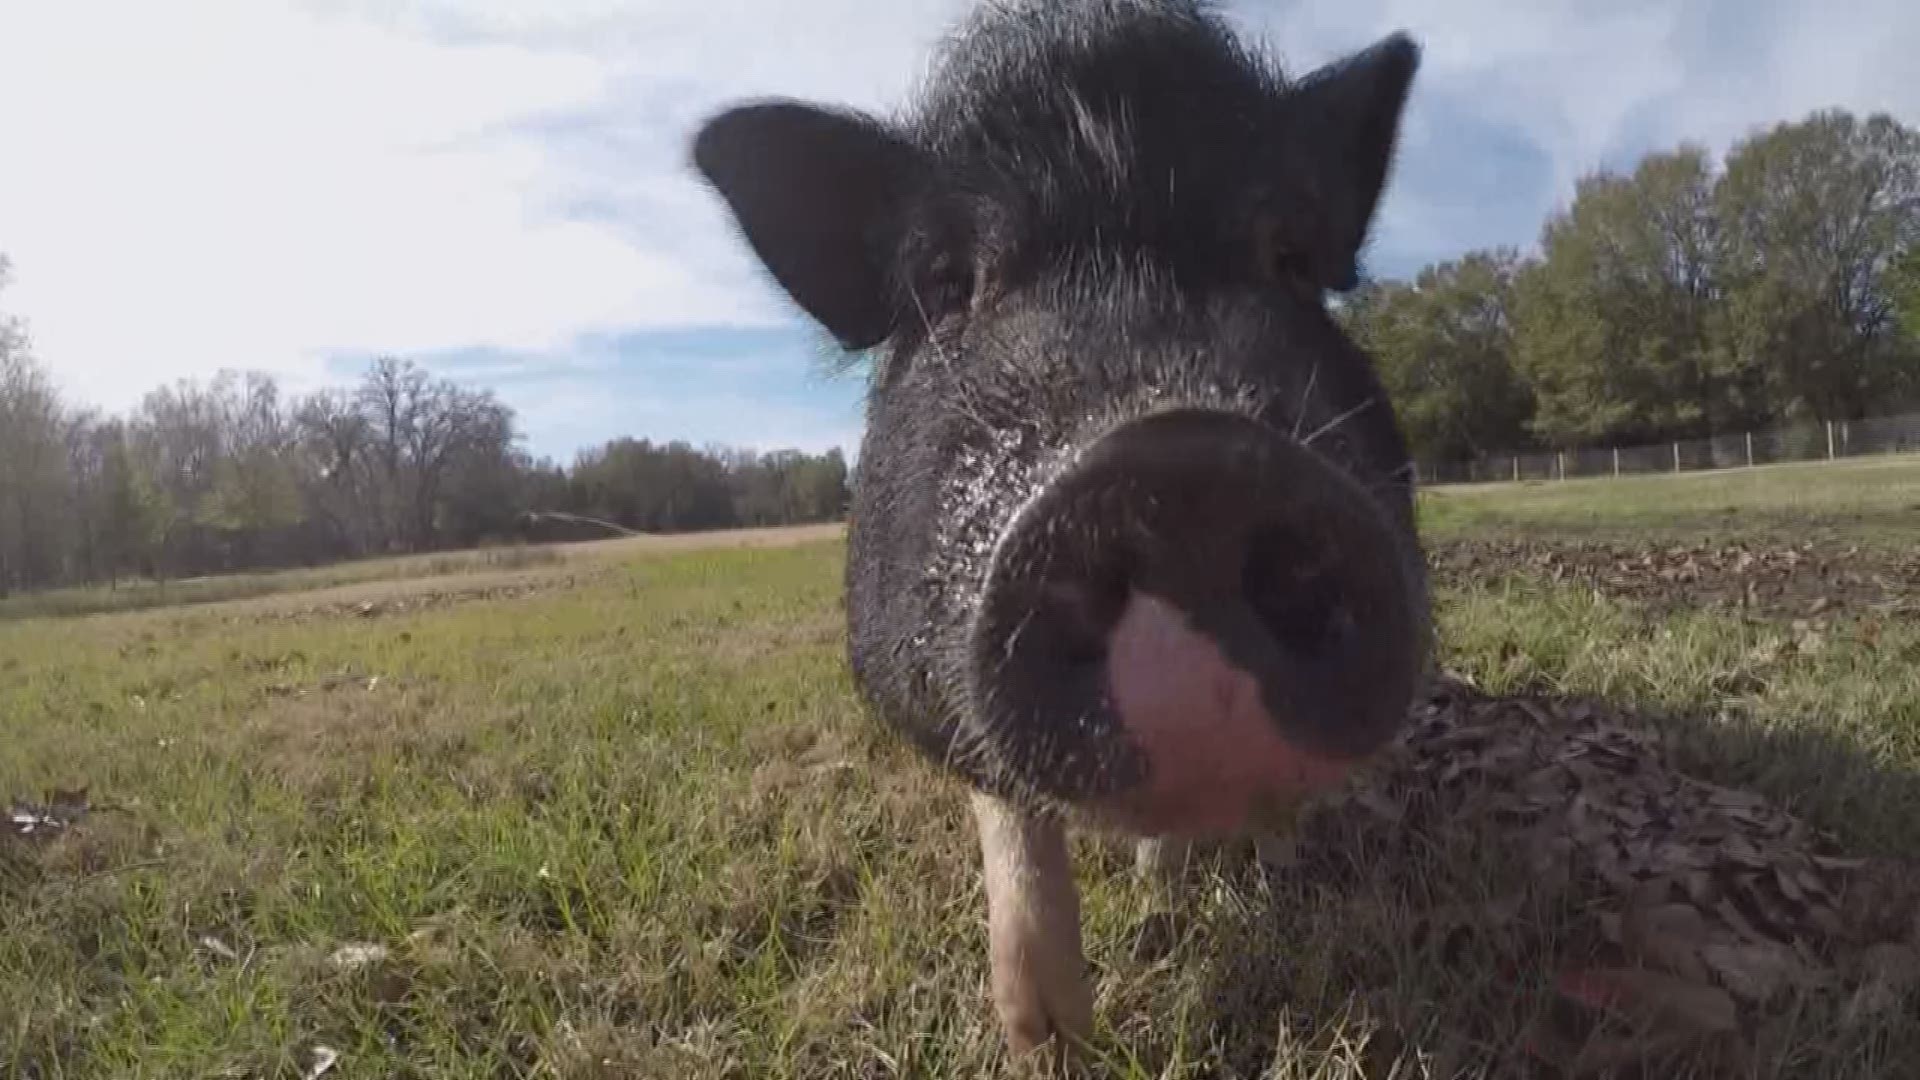 After volunteering at animal shelters all her life, she now runs her own rescue for pigs.